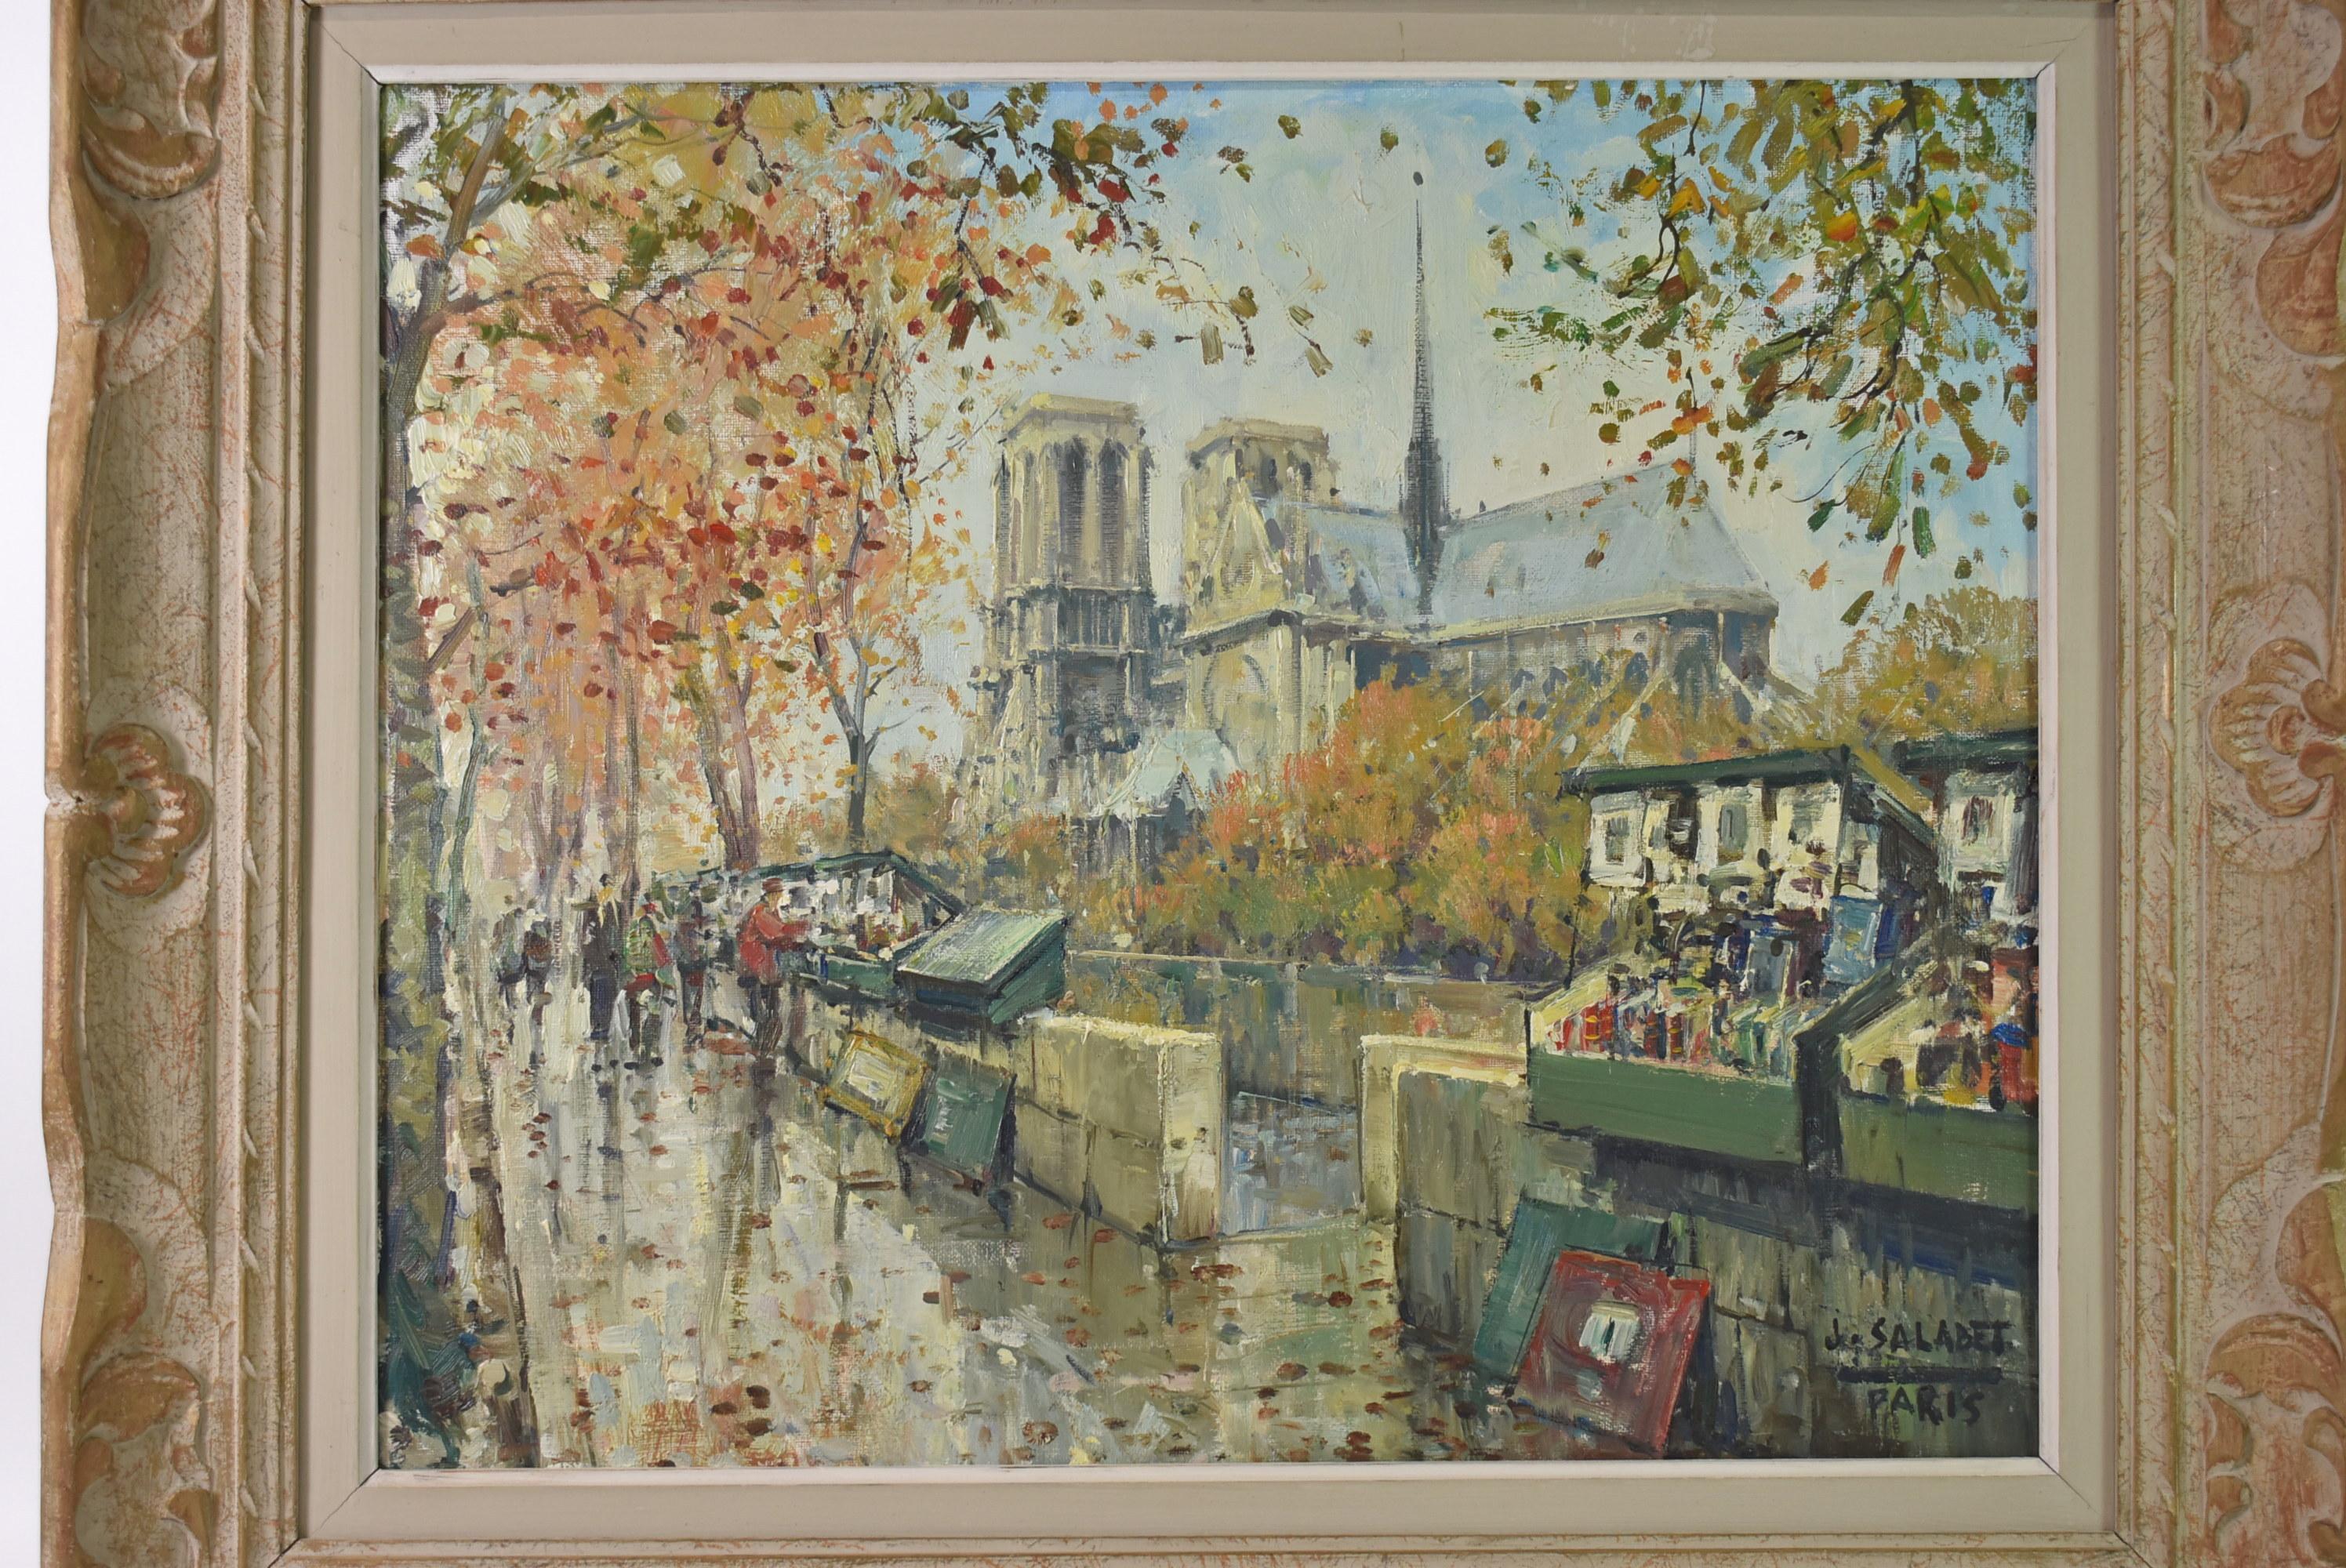 Oil Painting on Canvas of Paris Street Scene of Notre Dame by Jean Salabet. Circa 1950's. Fall scene of a street in Paris with Notre Dame Cathedral in the background and street vendors. Brass label on frame. Artist is Jean Salabet, also known as